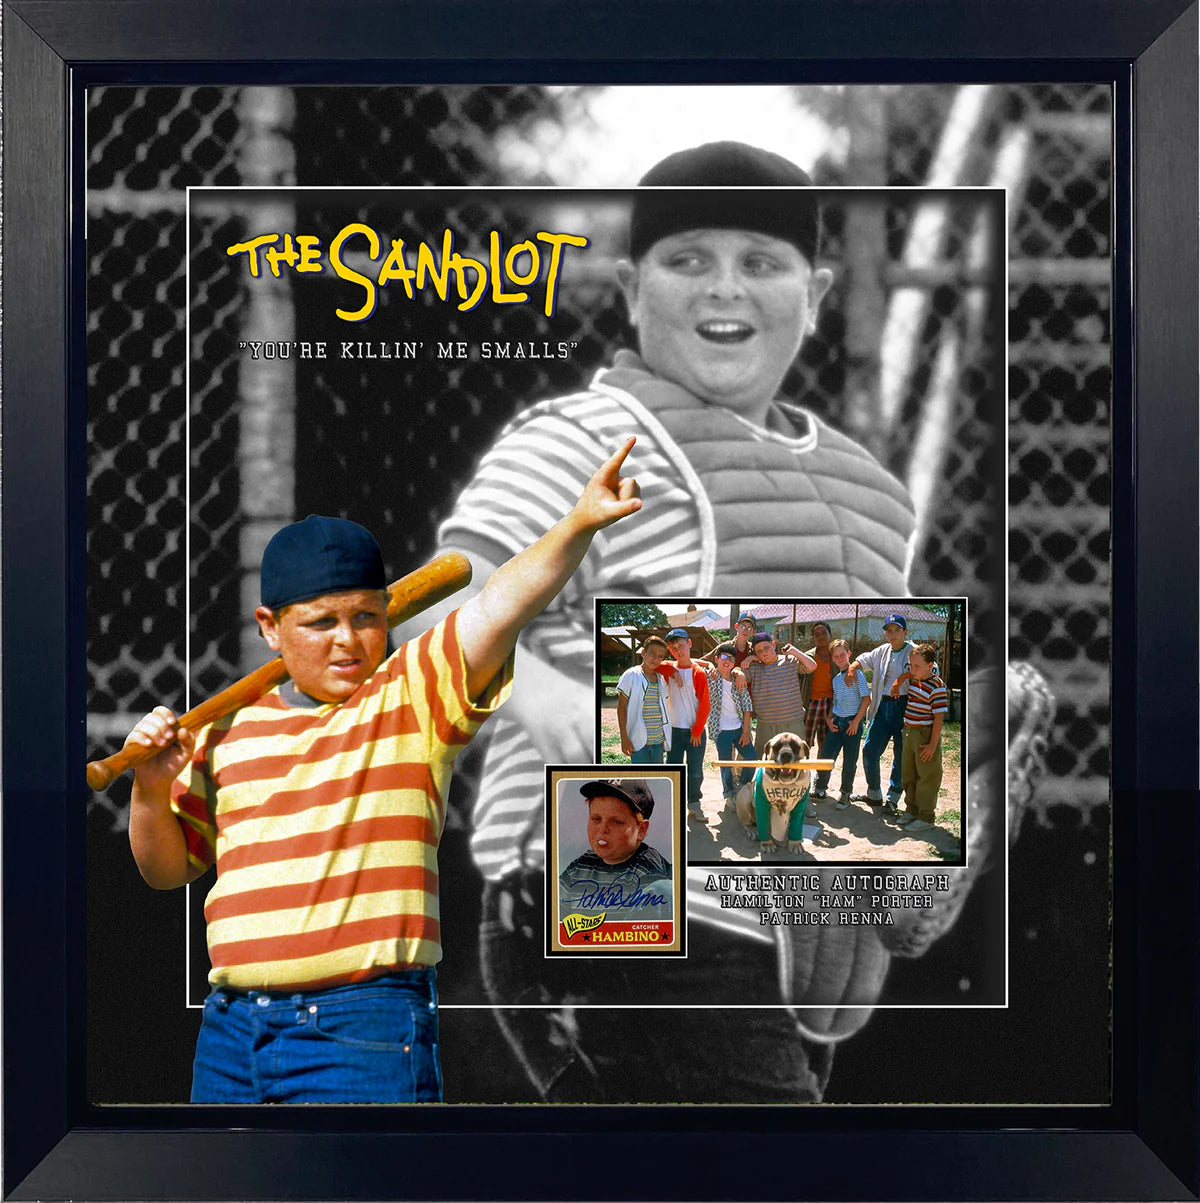 The Sandlot 3D framed photo with autographed card by Patrick Renna